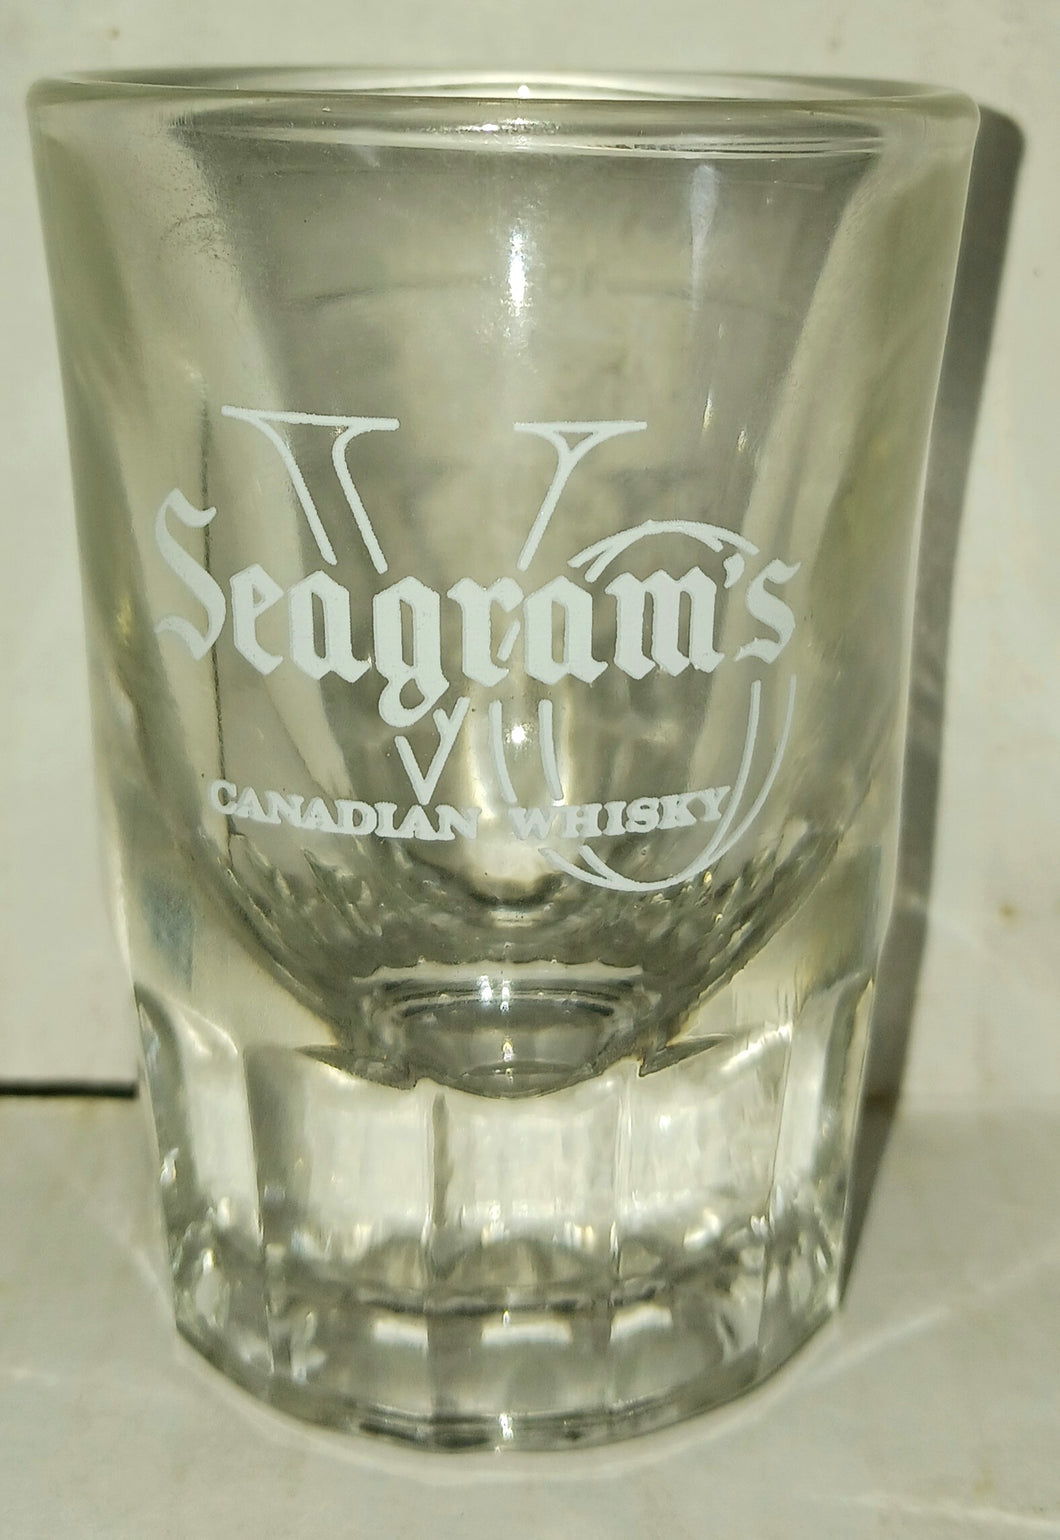 Segram's VO Canadian Whisky Vintage Shot Glass Heavyweight Glass Measuring Lines